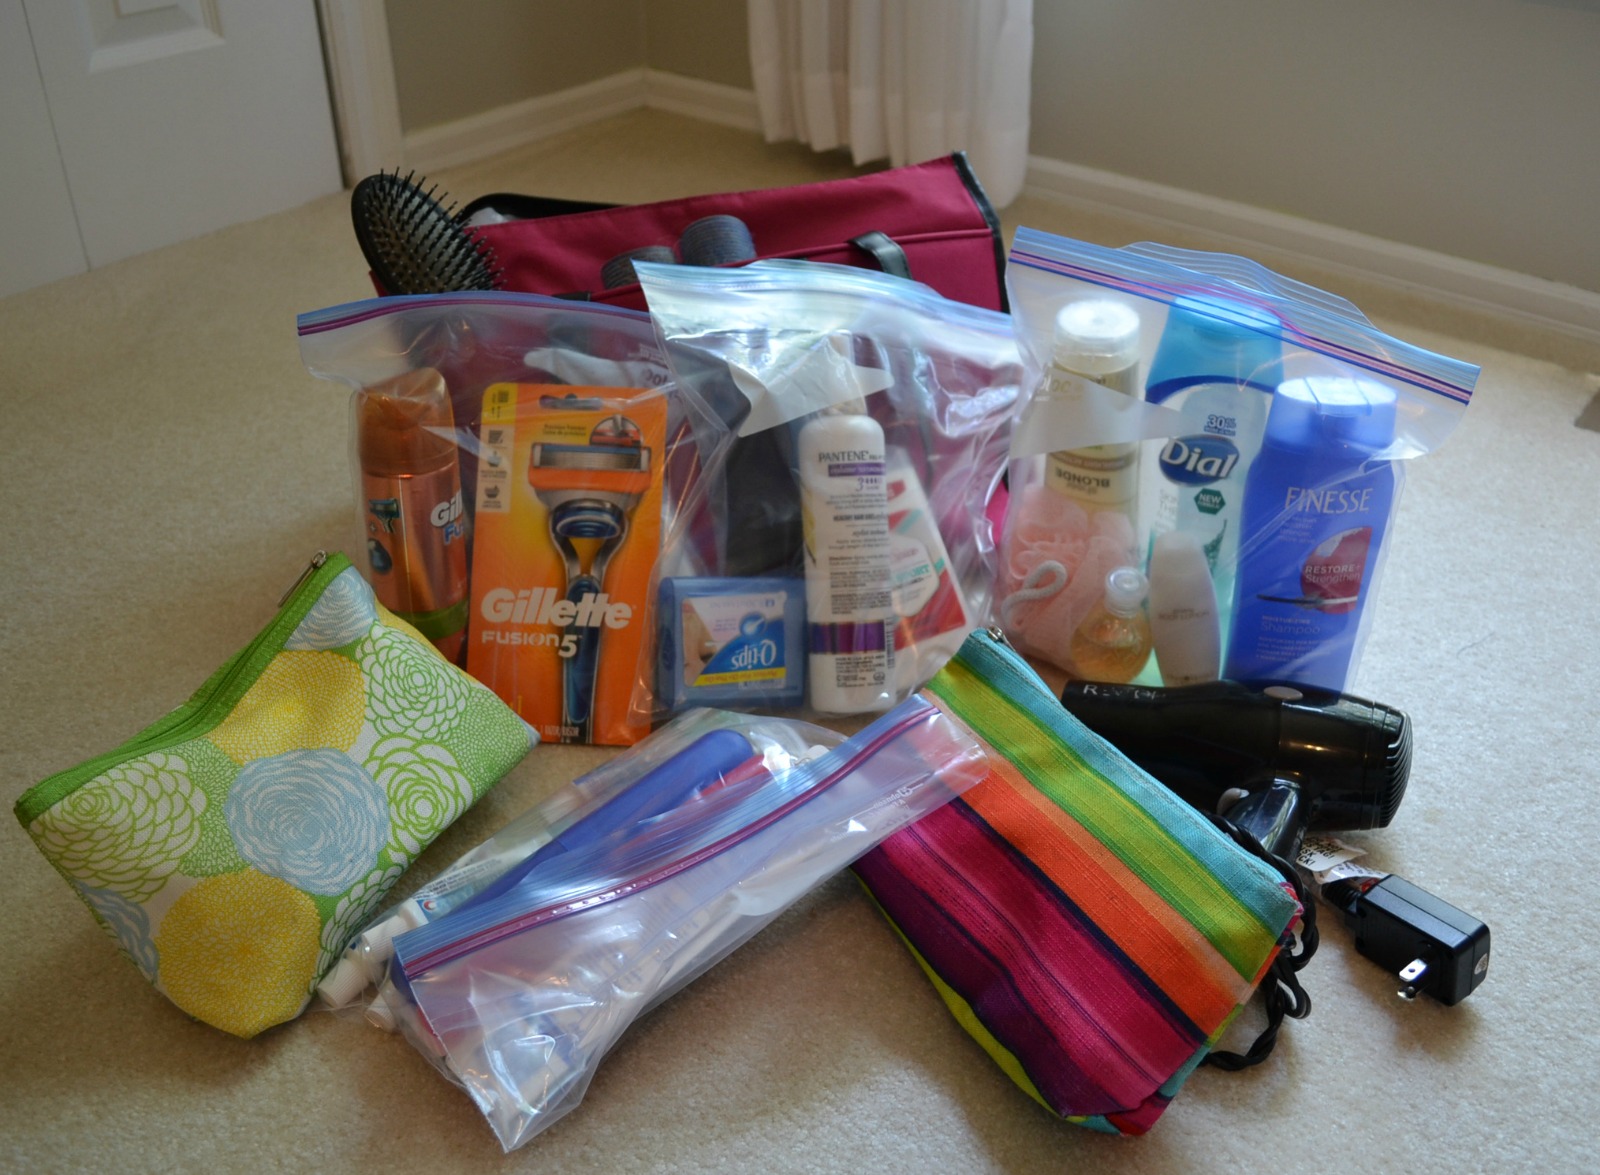 An organized system on packing for a road trip that will make your vacation go so much smoother.